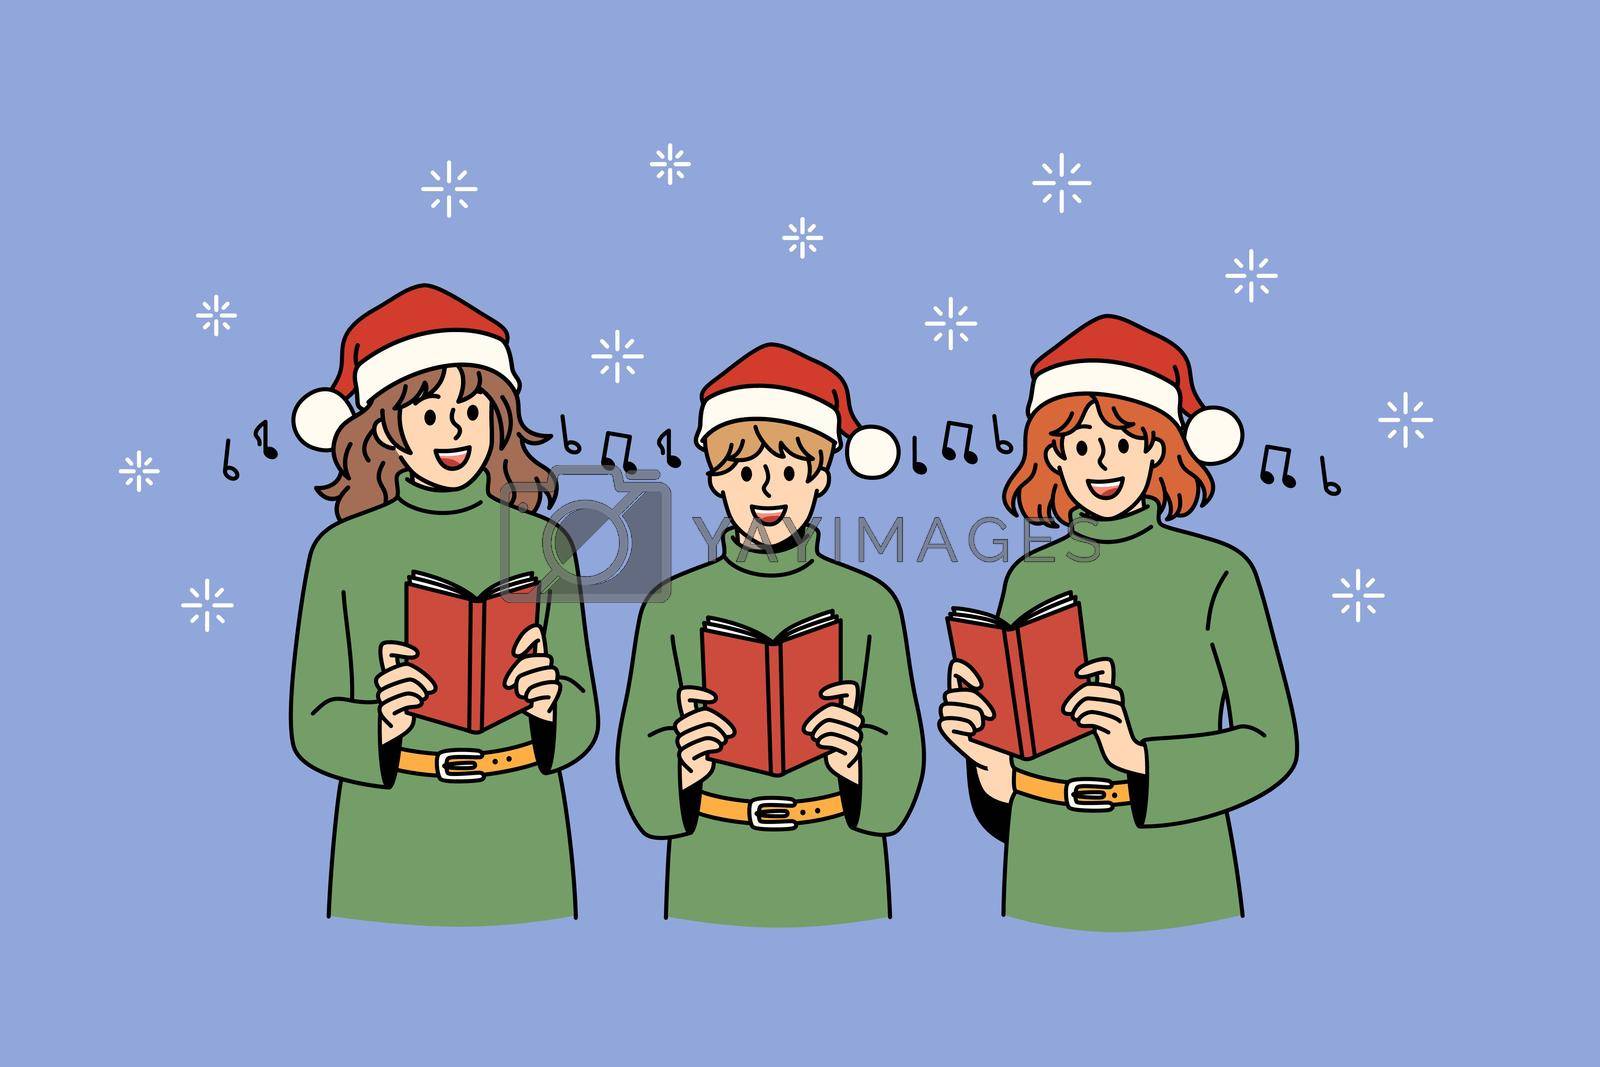 Gospel and Christmas celebration concept. Group of children teens in green sweaters and santa hats standing and singing traditional songs for holiday vector illustration